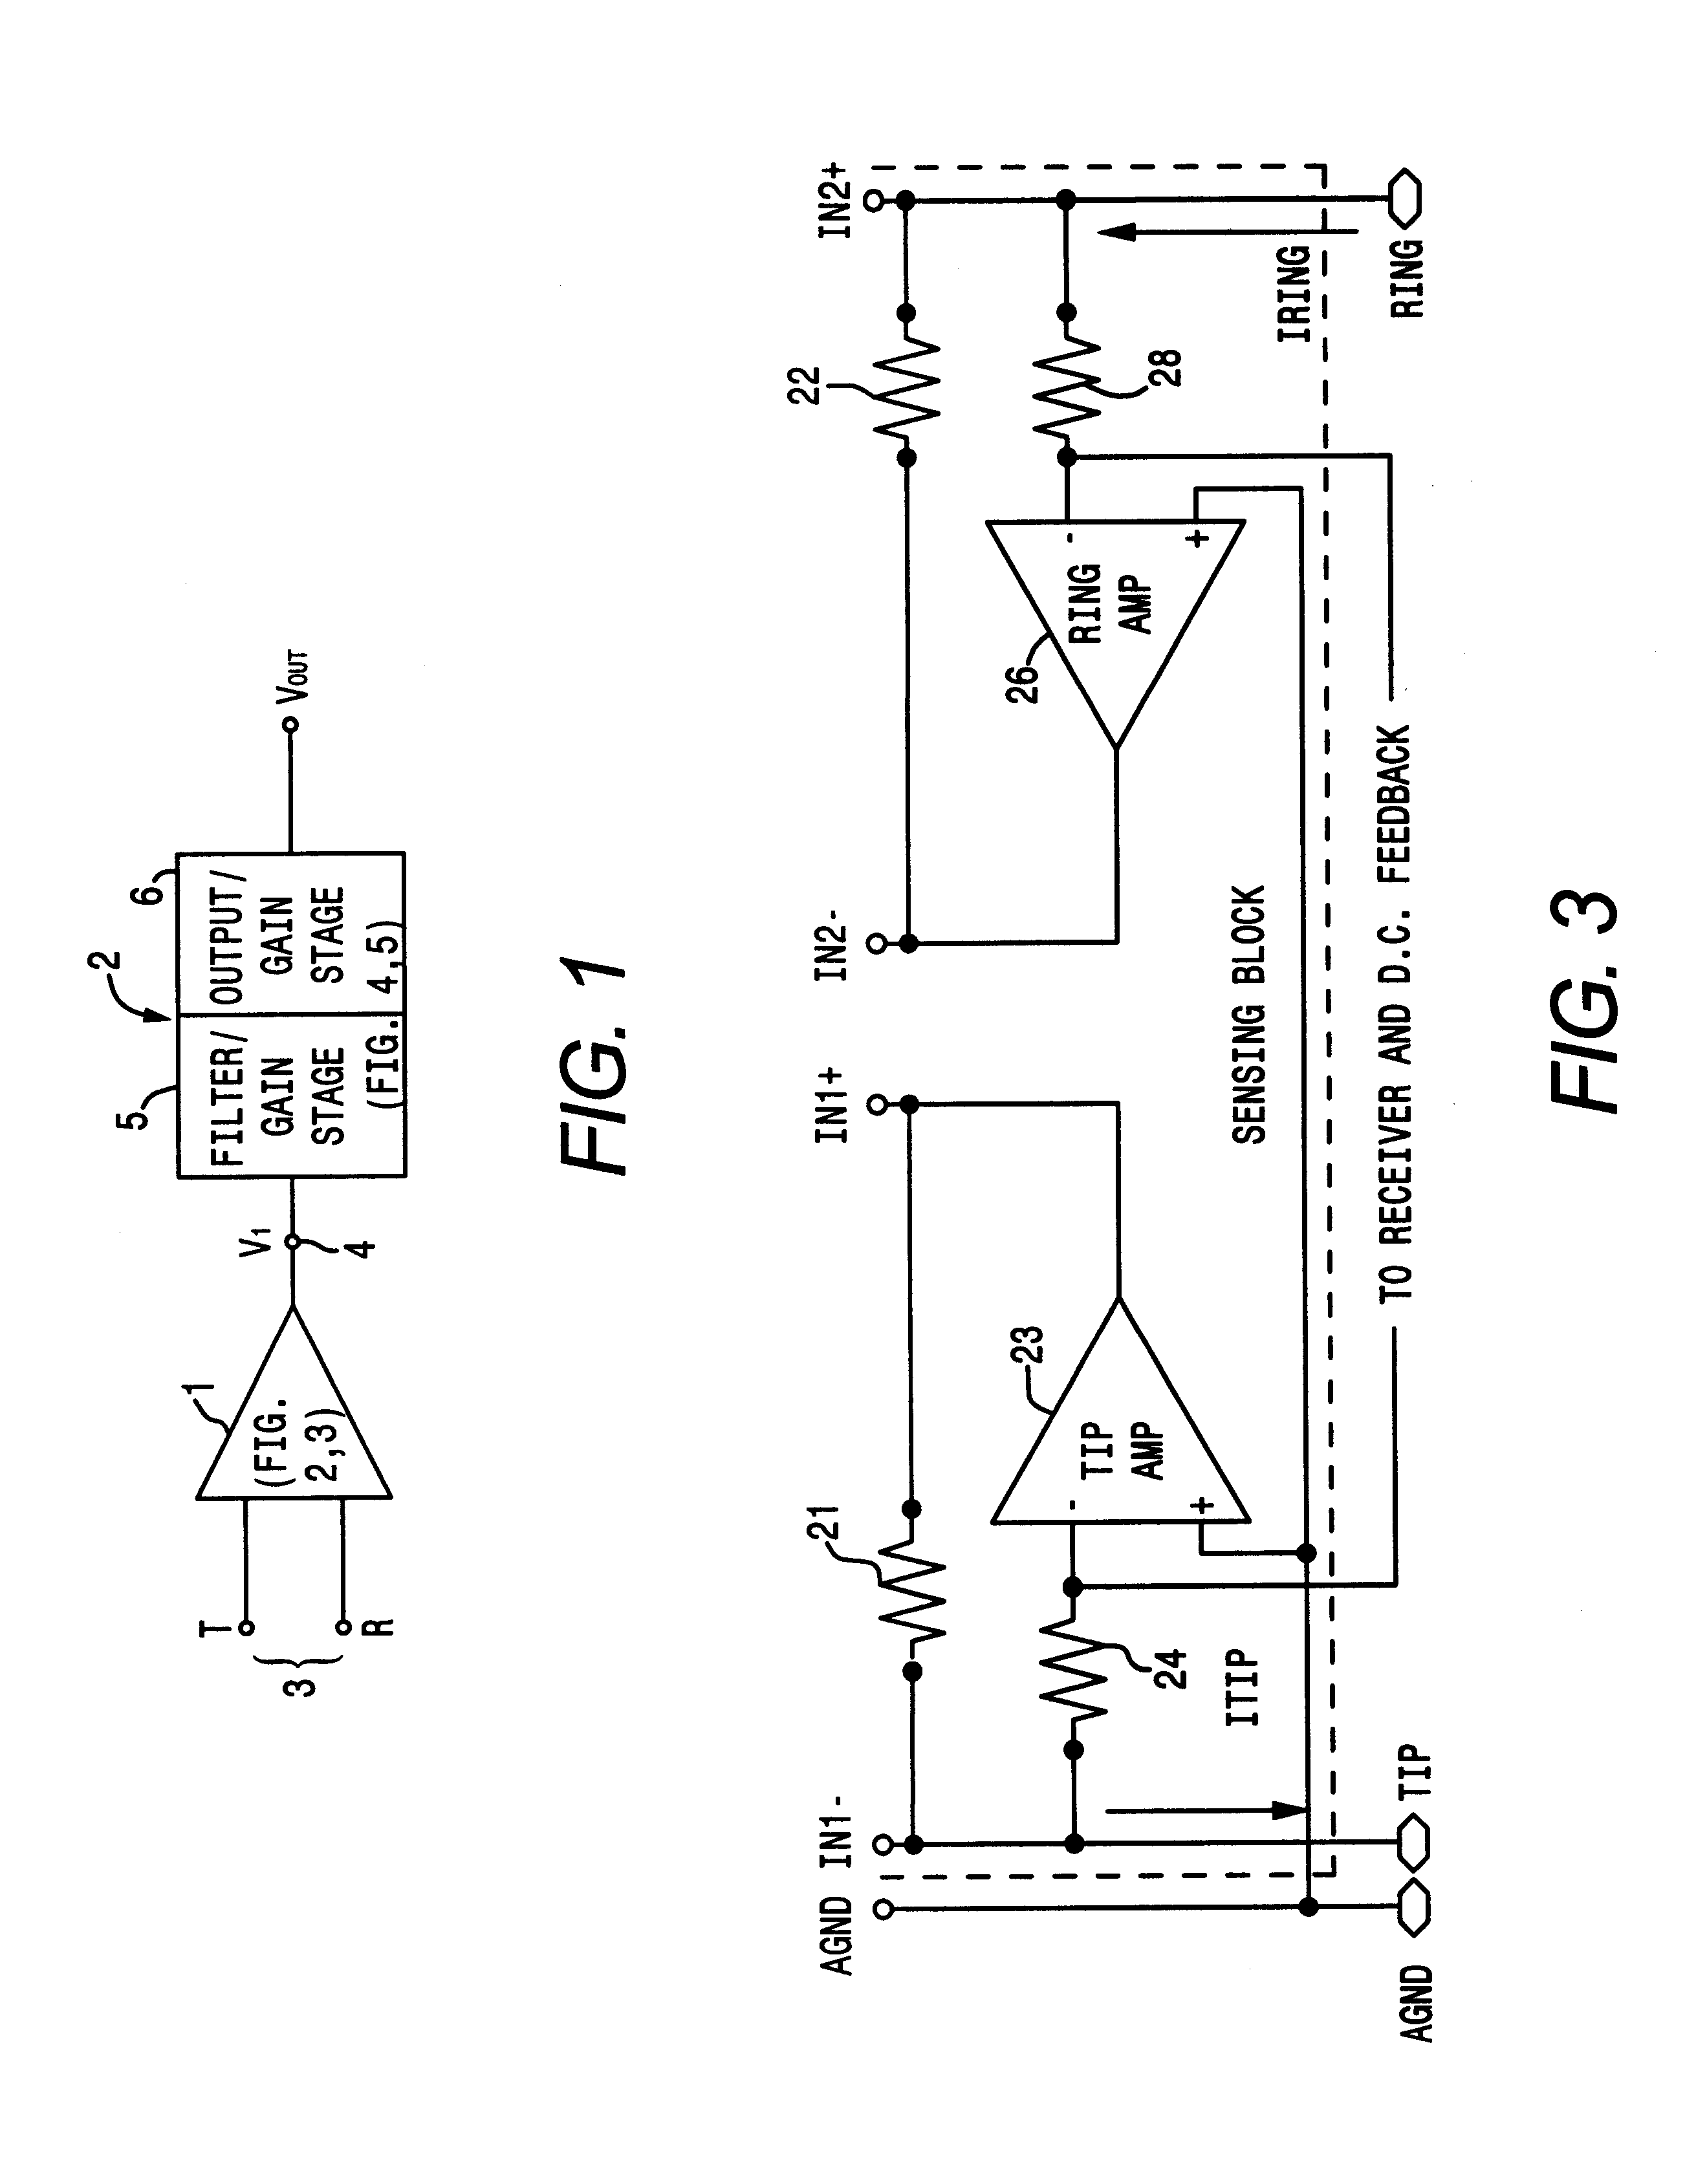 Precision, low-power current-sense transmission channel for subscriber line interface circuit, programmable with single ended impedances and capable of exhibiting a voltage sense response